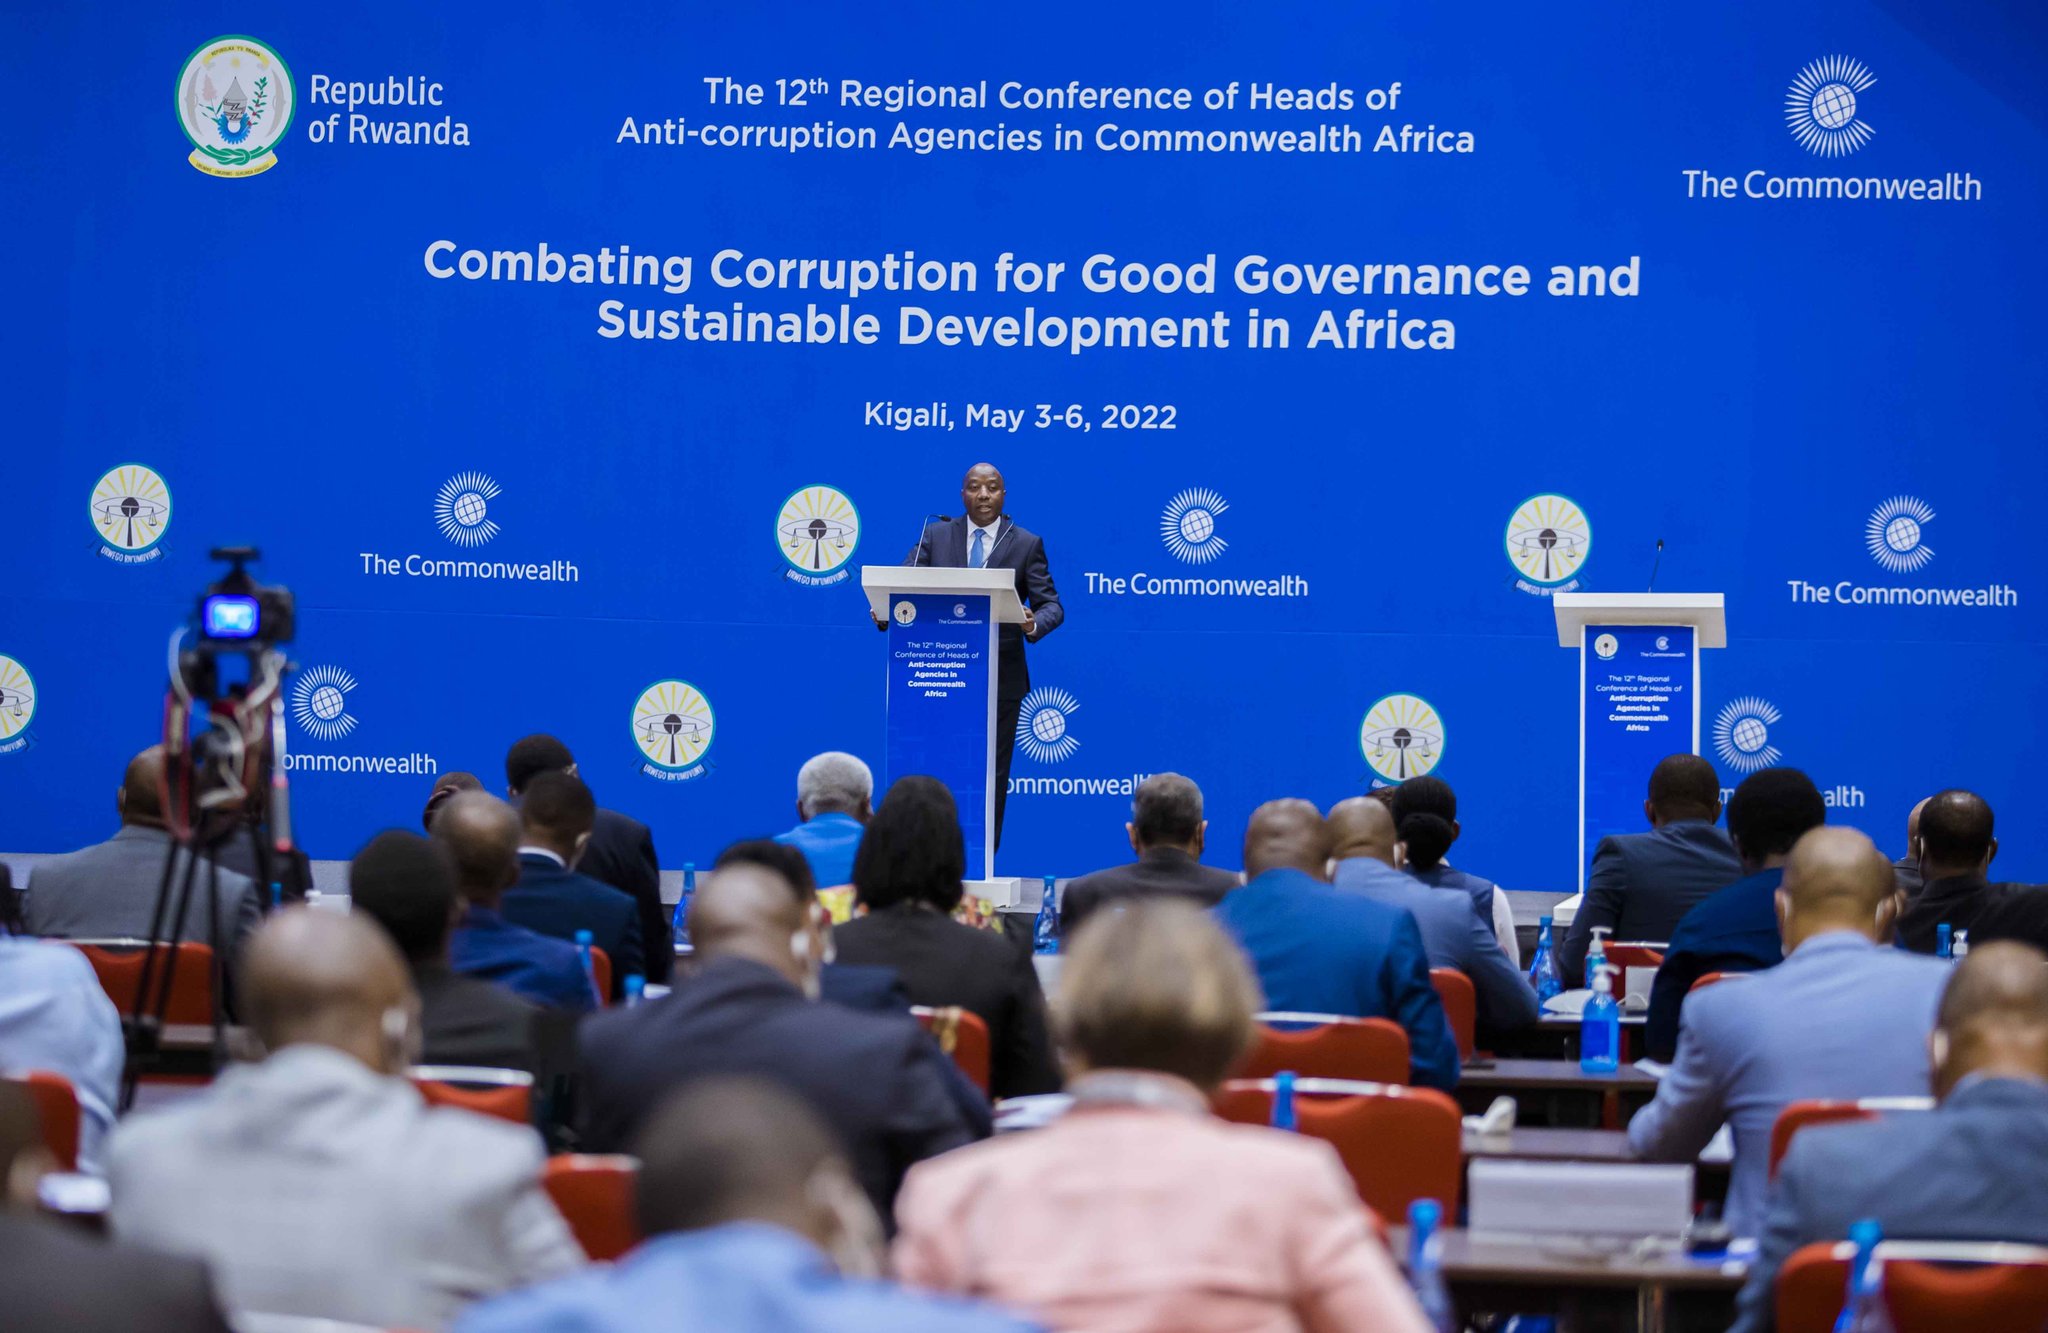 Prime Minister, Dr. Edouard Ngirente delivers remarks during the 12th Regional Conference of Heads of Anti-corruption agencies in Commonwealth Africa in Kigali on May 3.